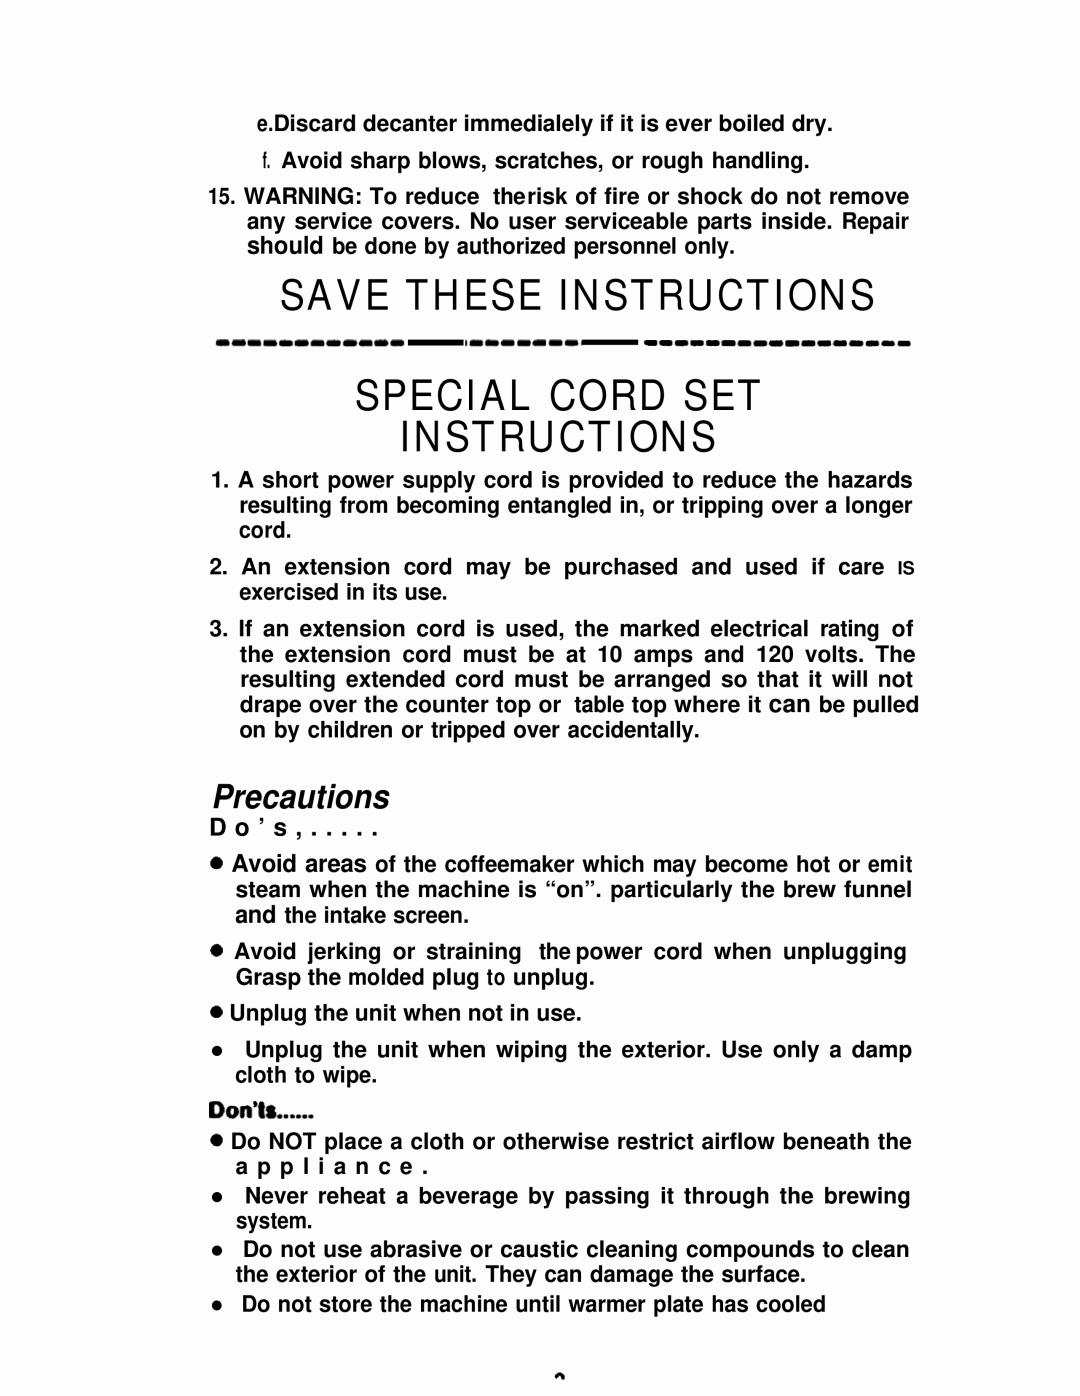 Mr. Coffee IDS40 manual Precautions, Save These Instructions Special Cord Set 